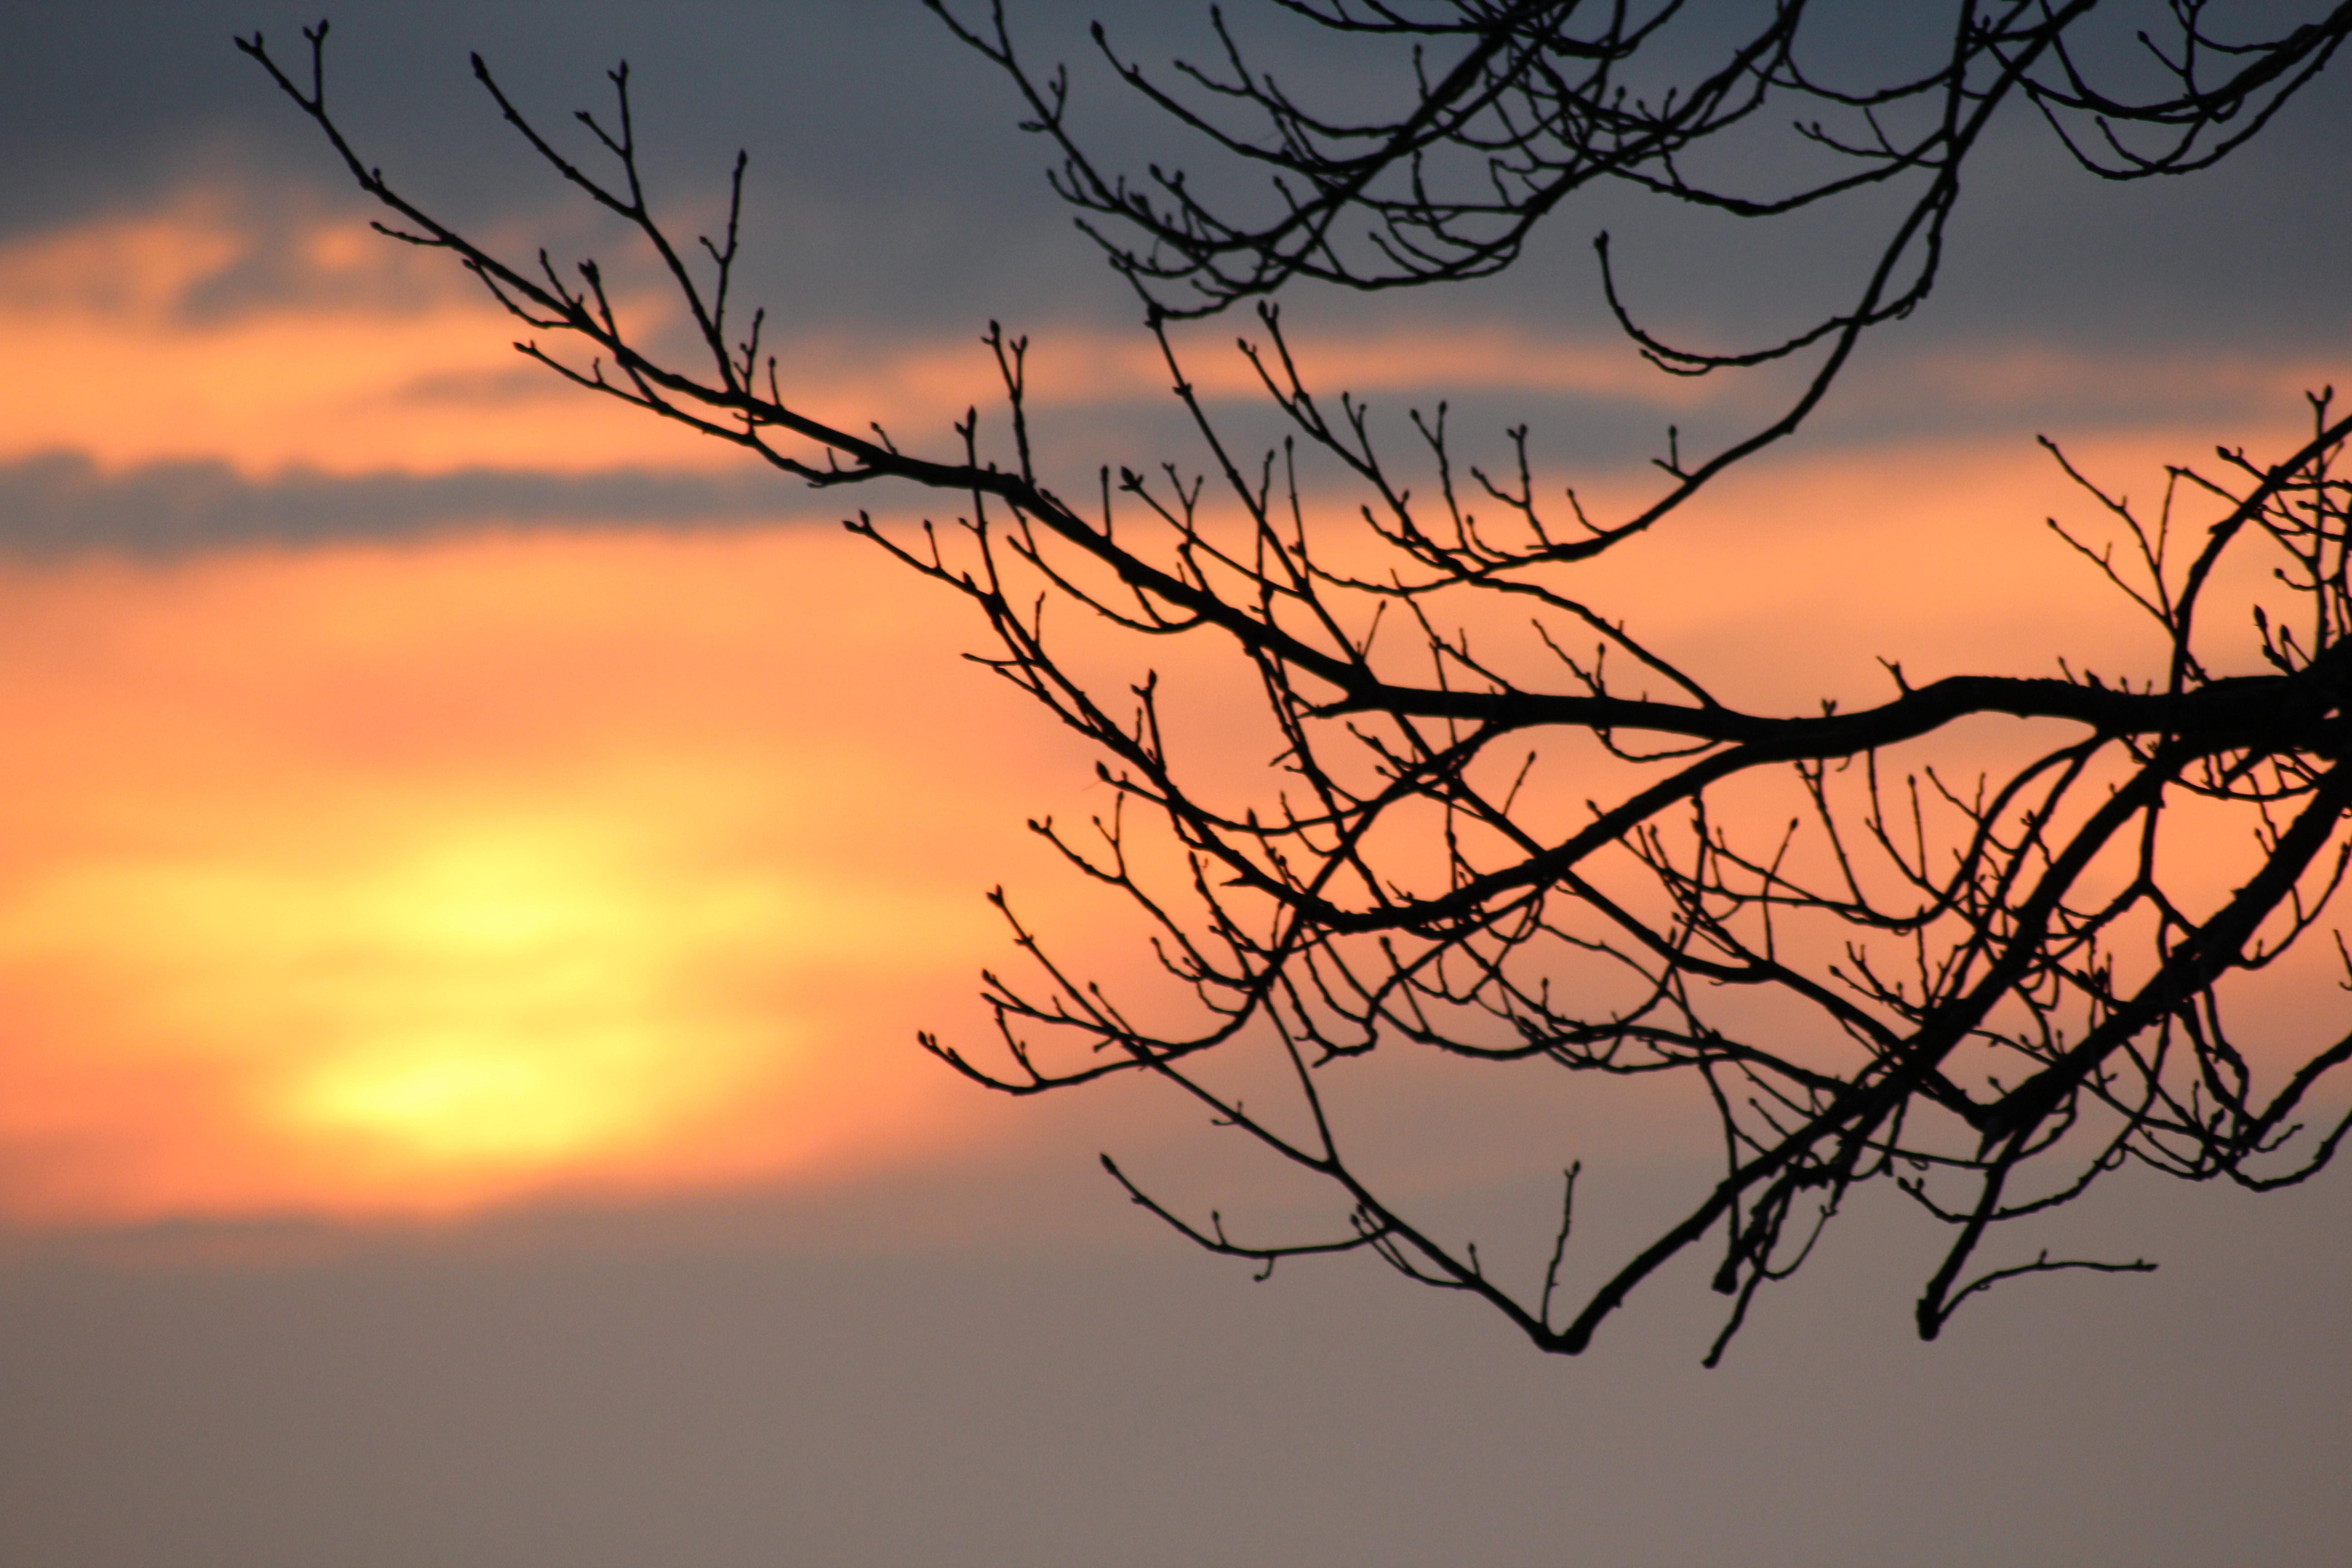 Sunset, Afterglow, Sky, Branch, sunset, bare tree